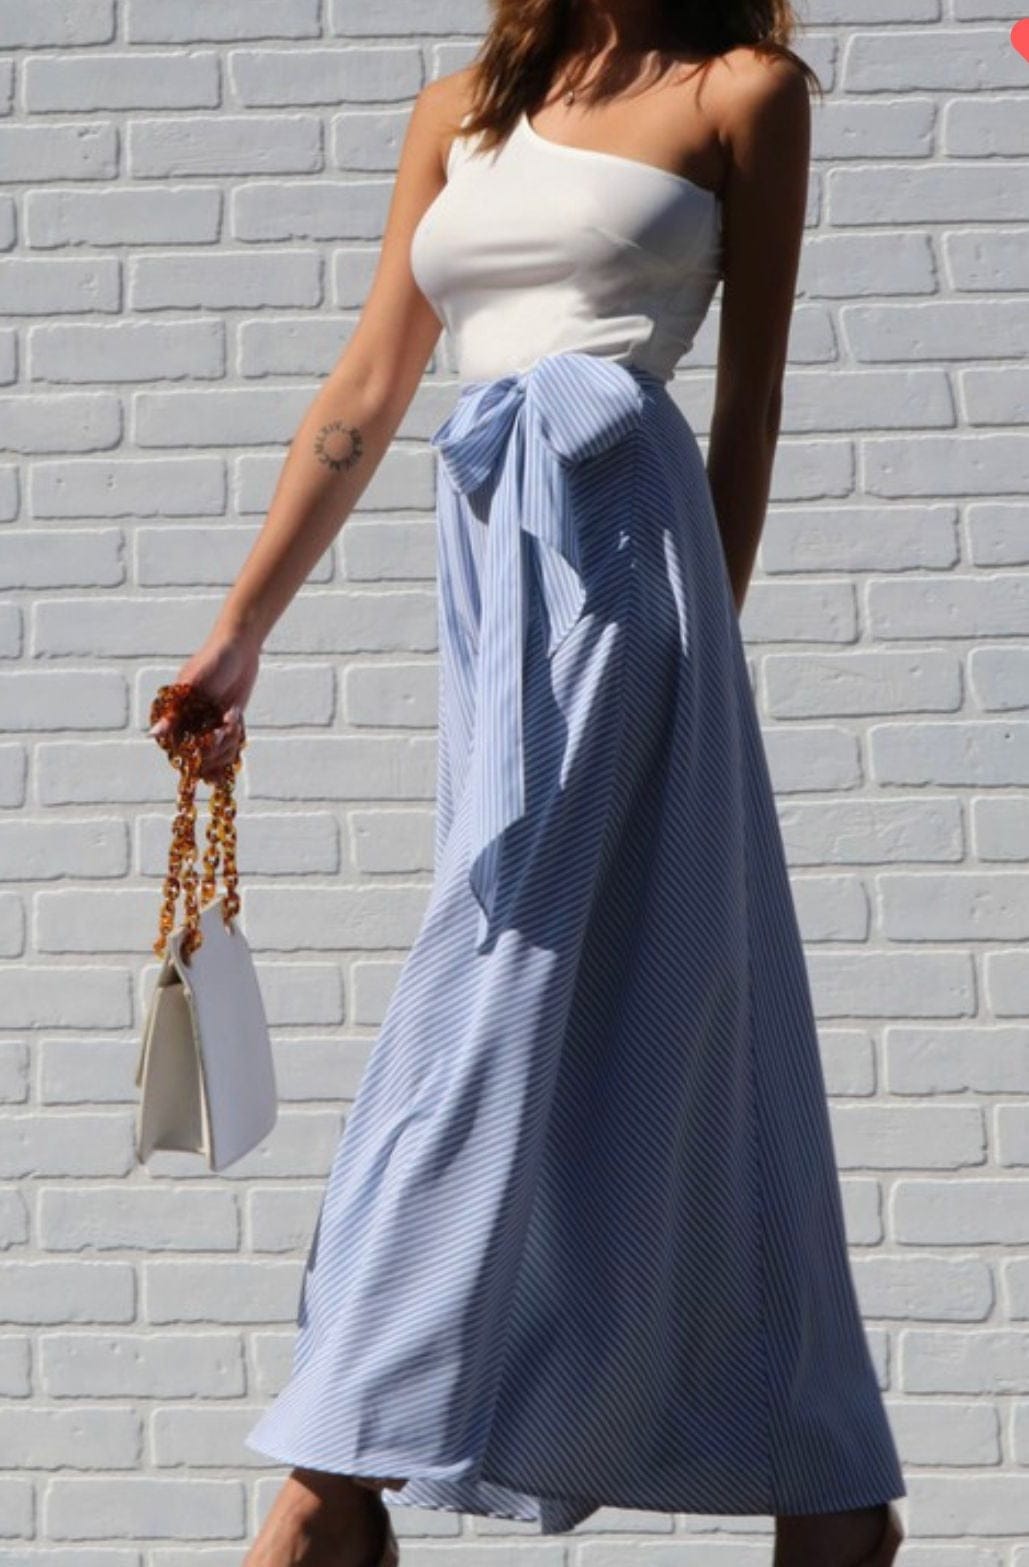 "Blue Bliss: A Knee-Length Maxi Dress for a Sassy and Chic Look"